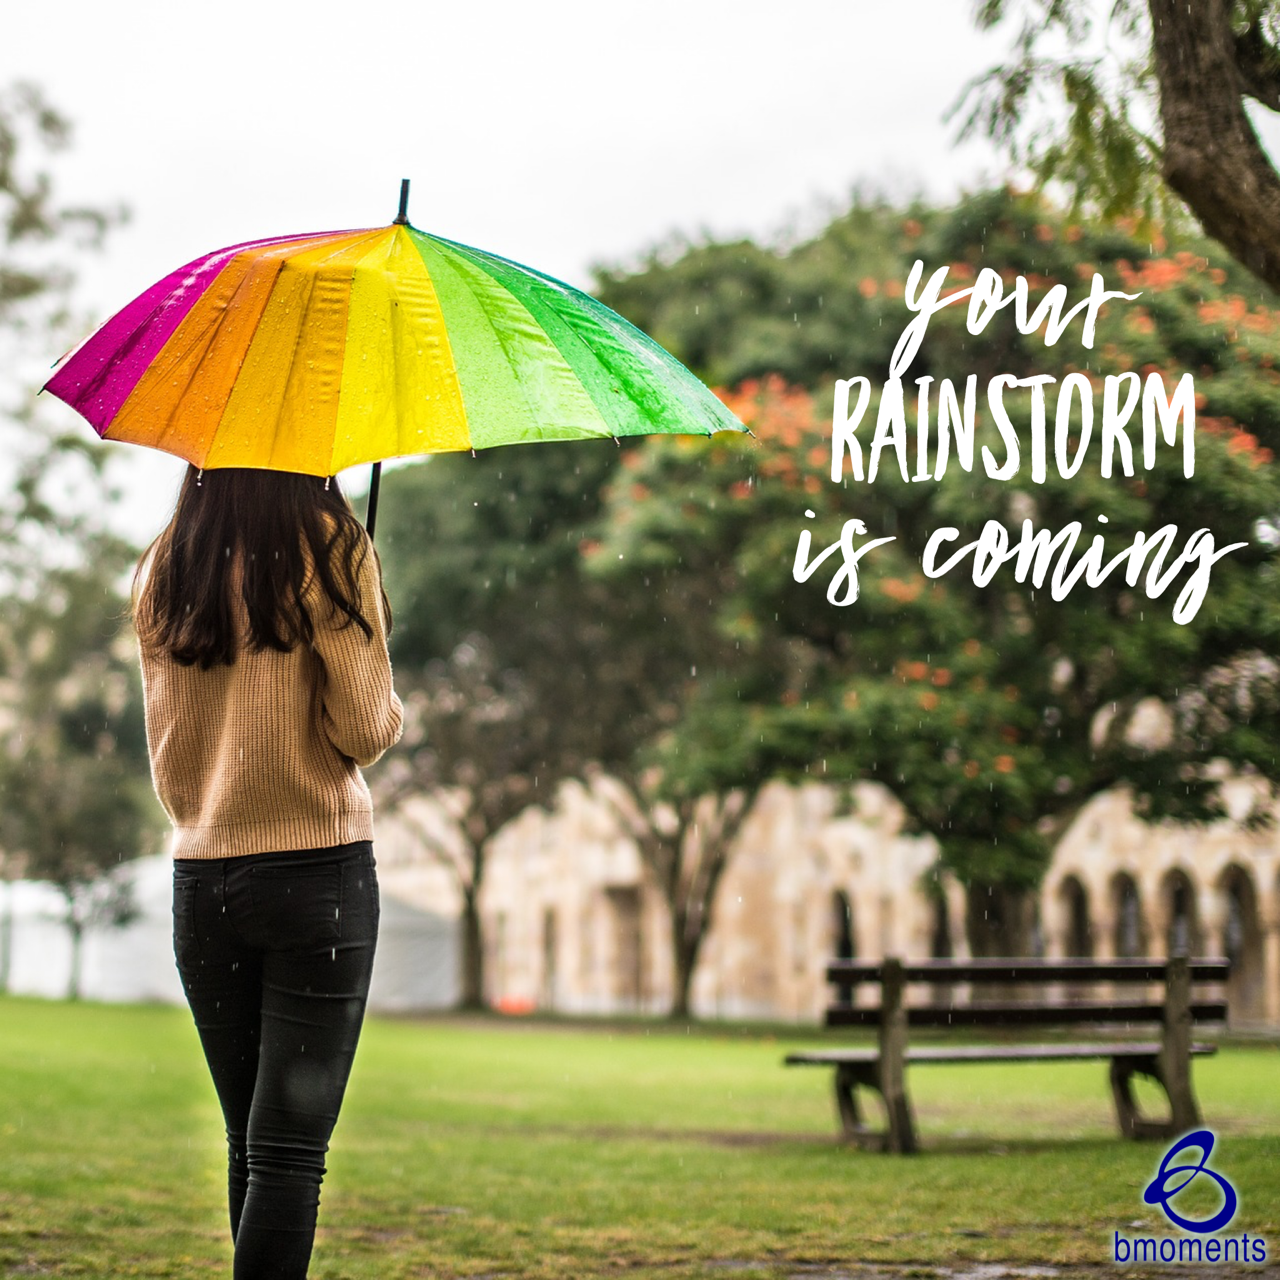 Get Your Umbrella Out for a Rainstorm of Blessings